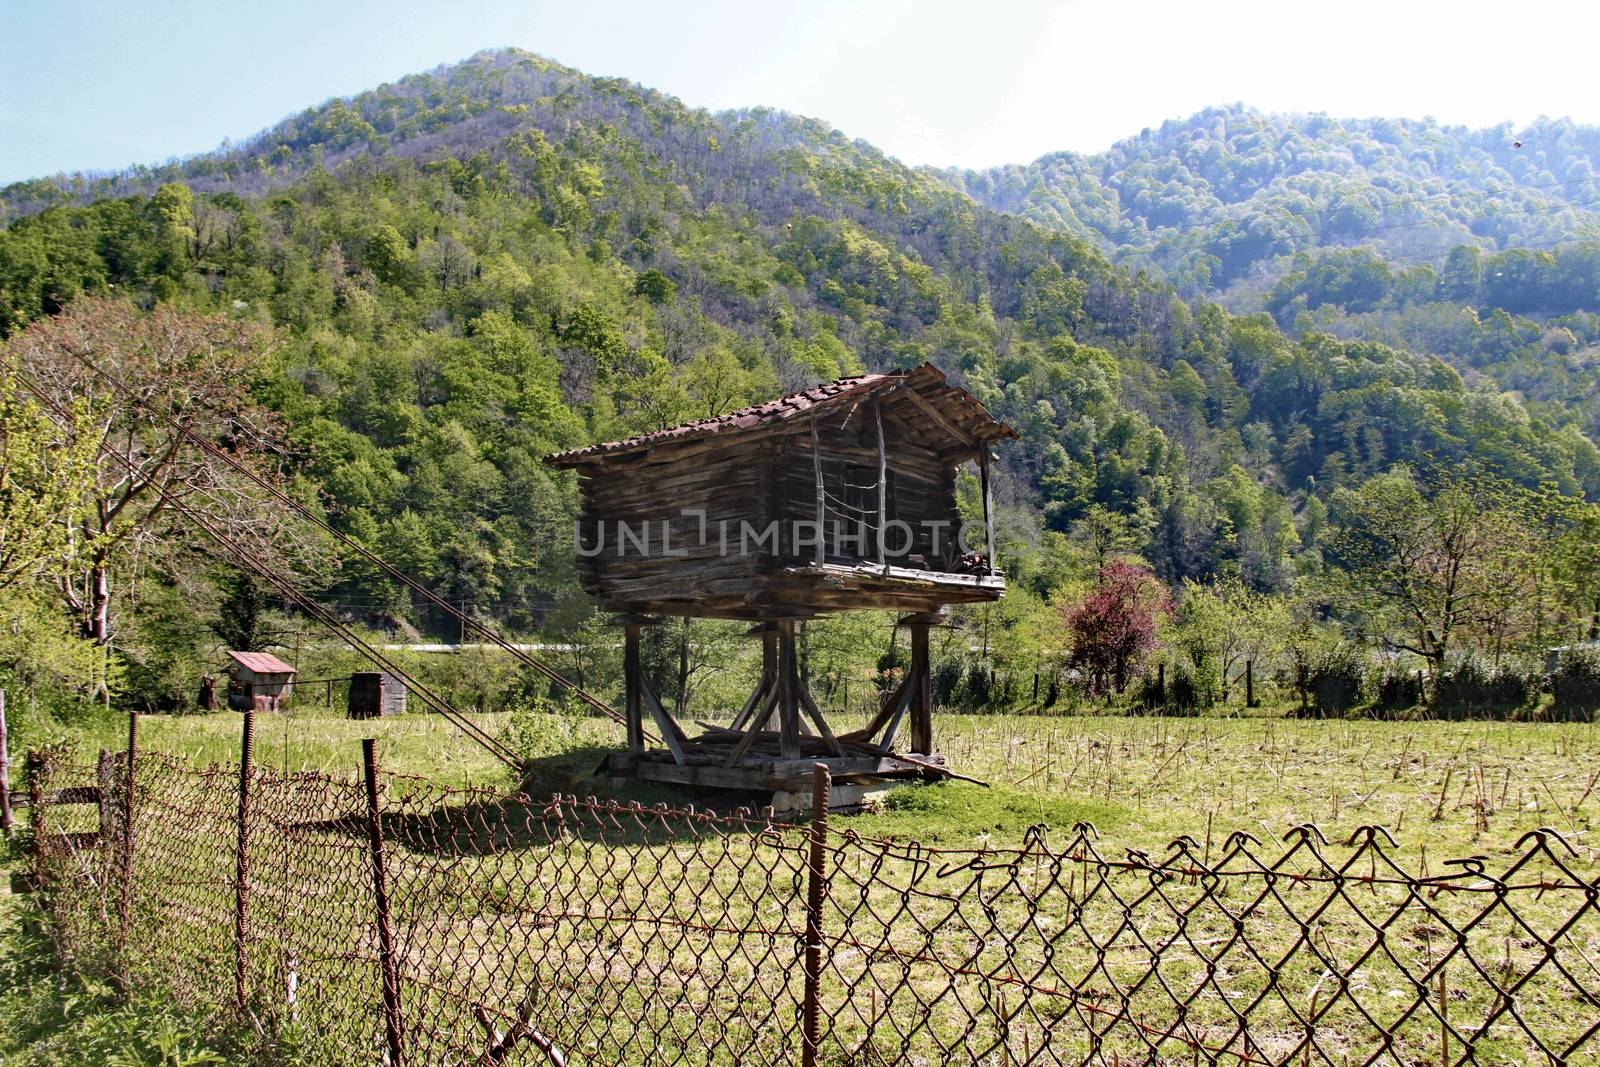 A construction for storing crops in a village in Georgia, made to protect the crop from bears and rodents